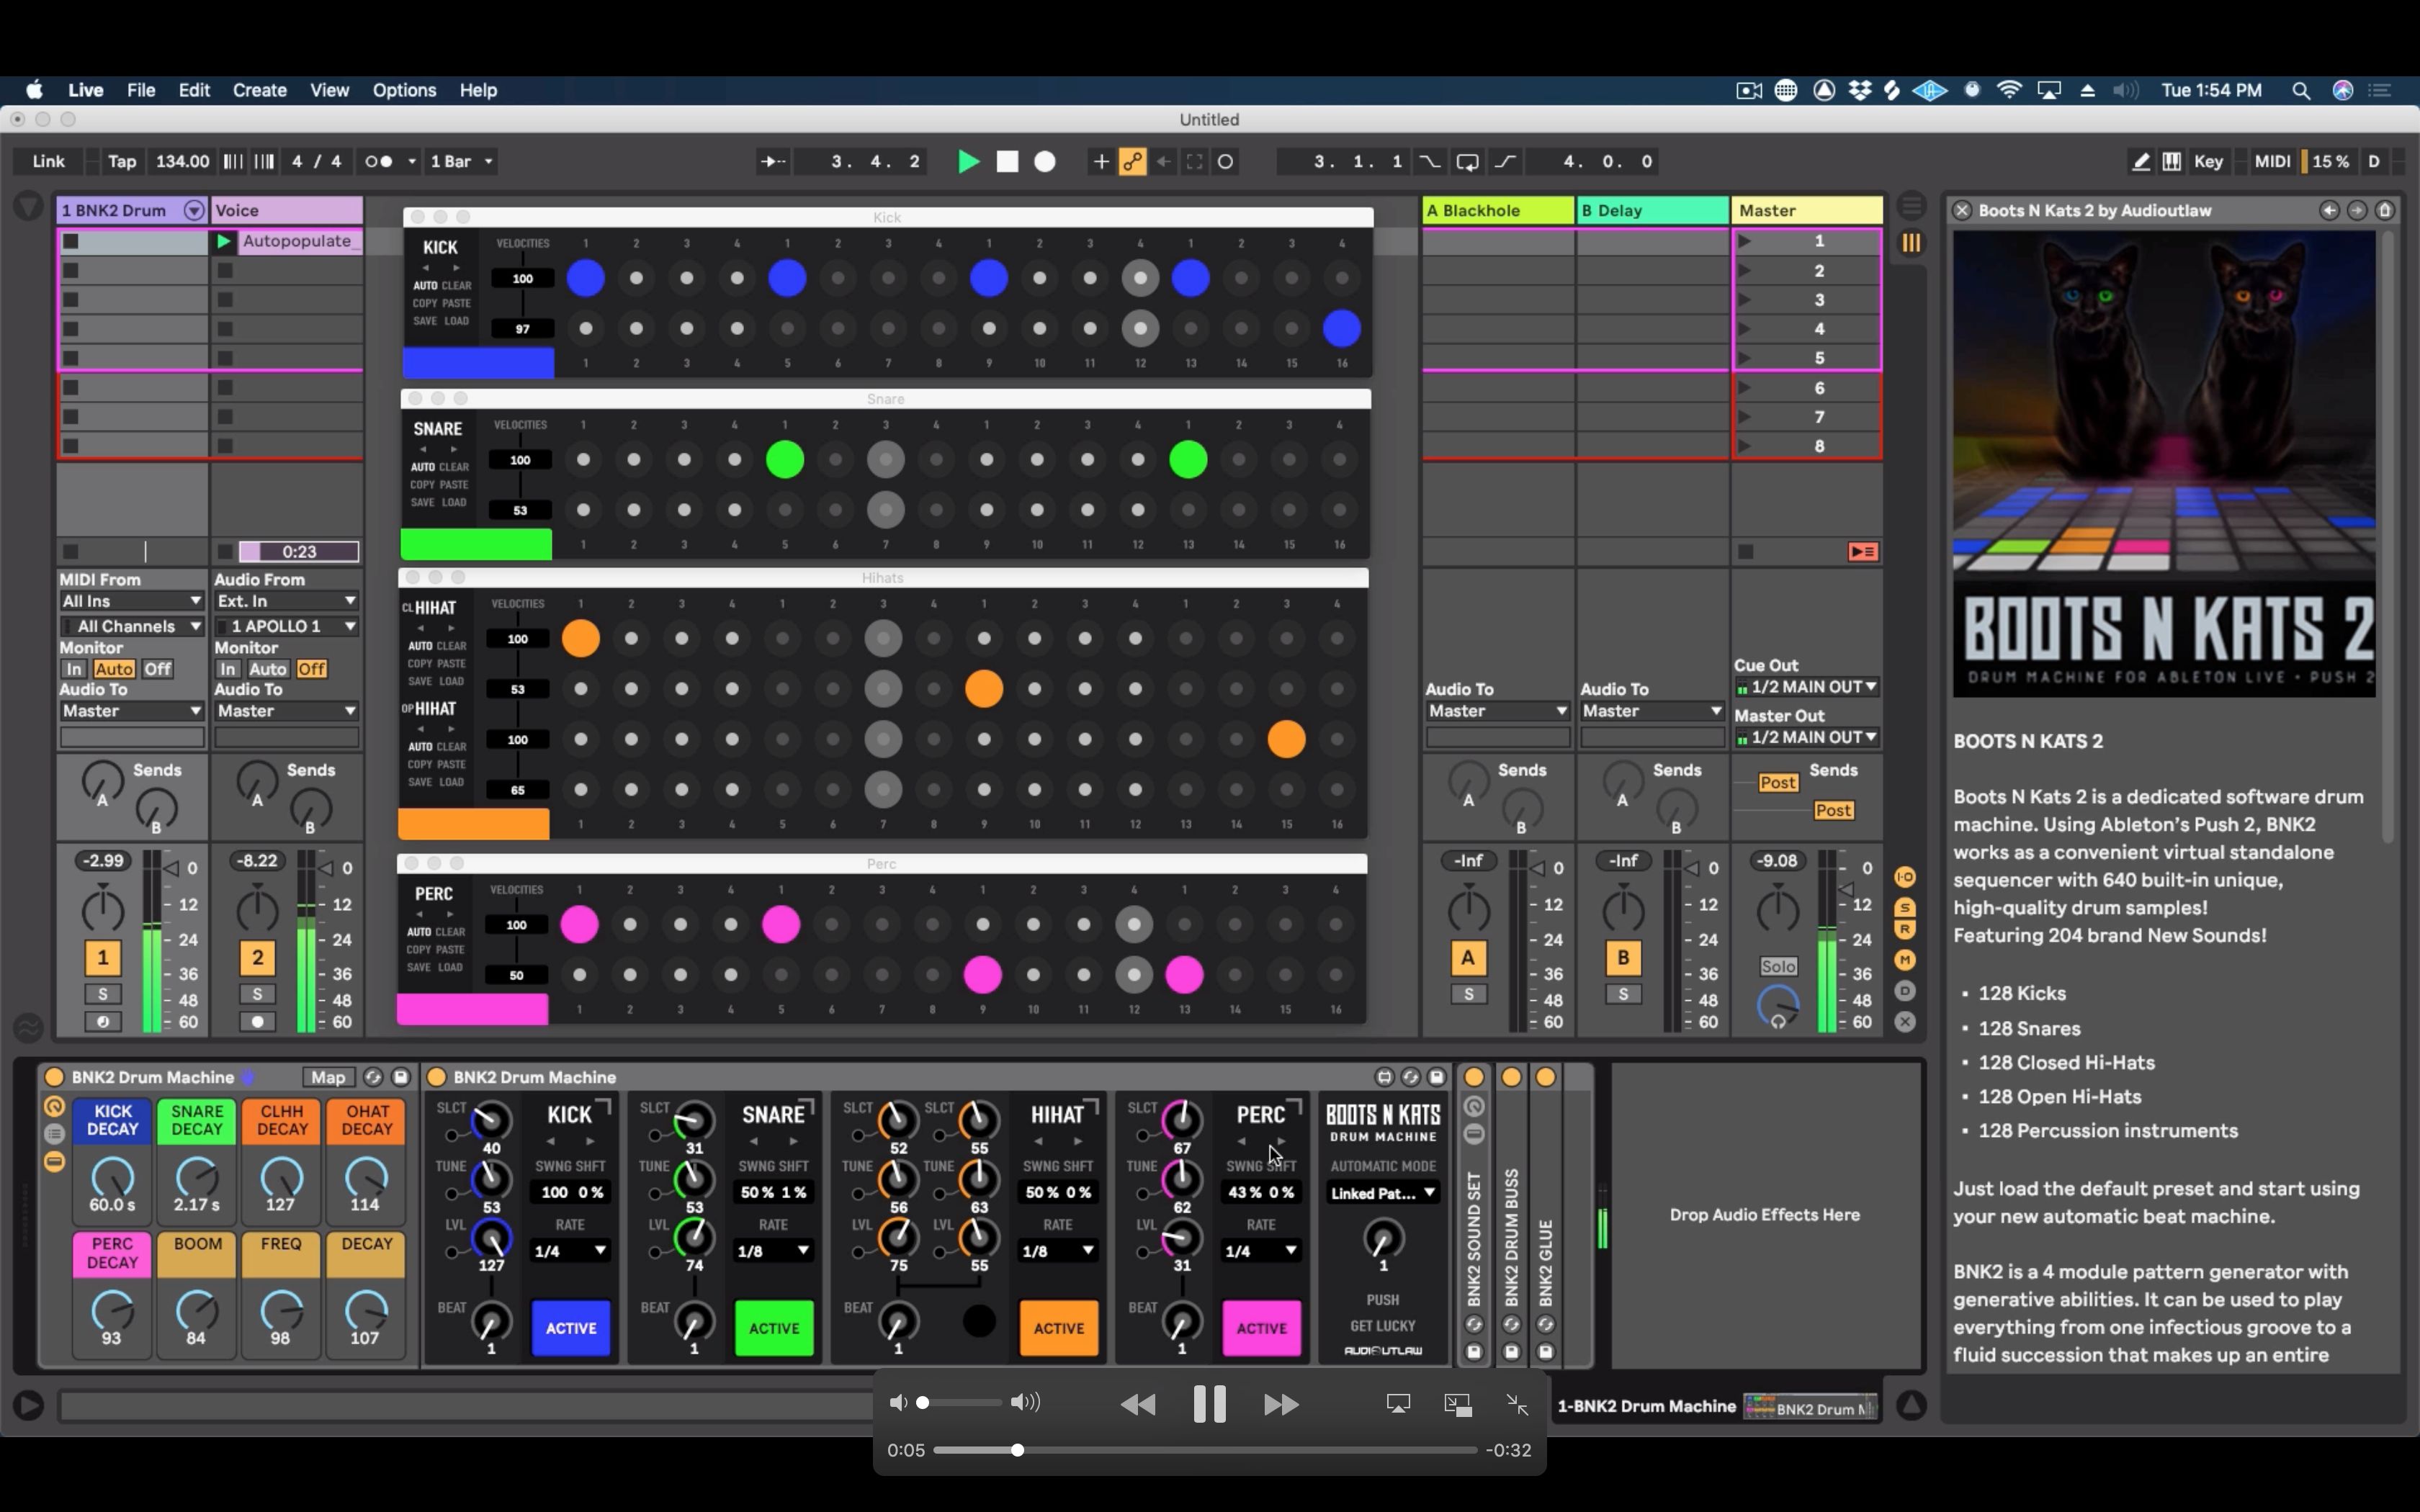 Boots N Kats 2 Is A New Drum Machine For Ableton Live And Push 2